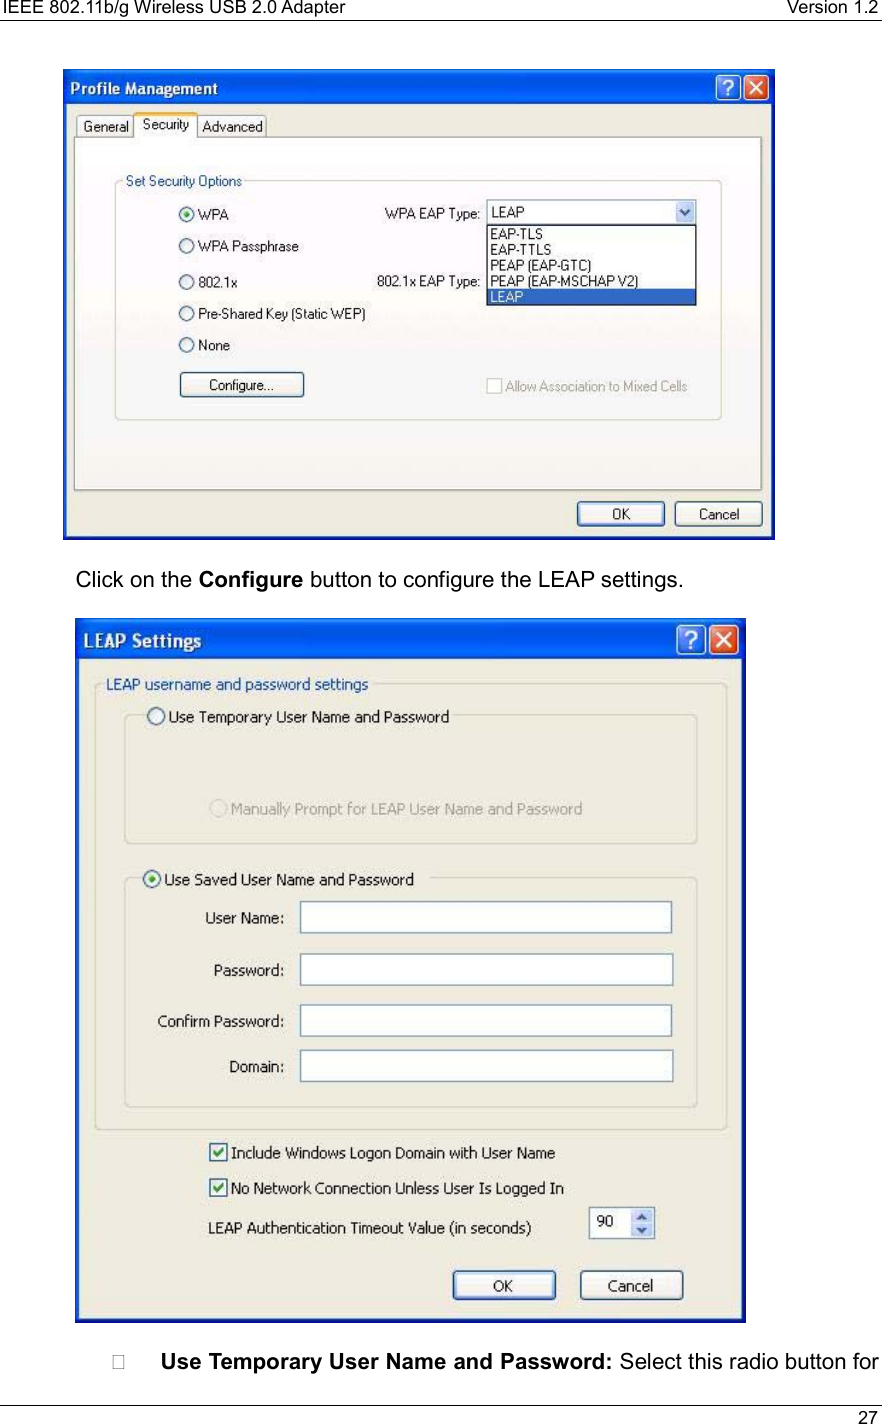 IEEE 802.11b/g Wireless USB 2.0 Adapter    Version 1.2   27    Click on the Configure button to configure the LEAP settings.      Use Temporary User Name and Password: Select this radio button for 